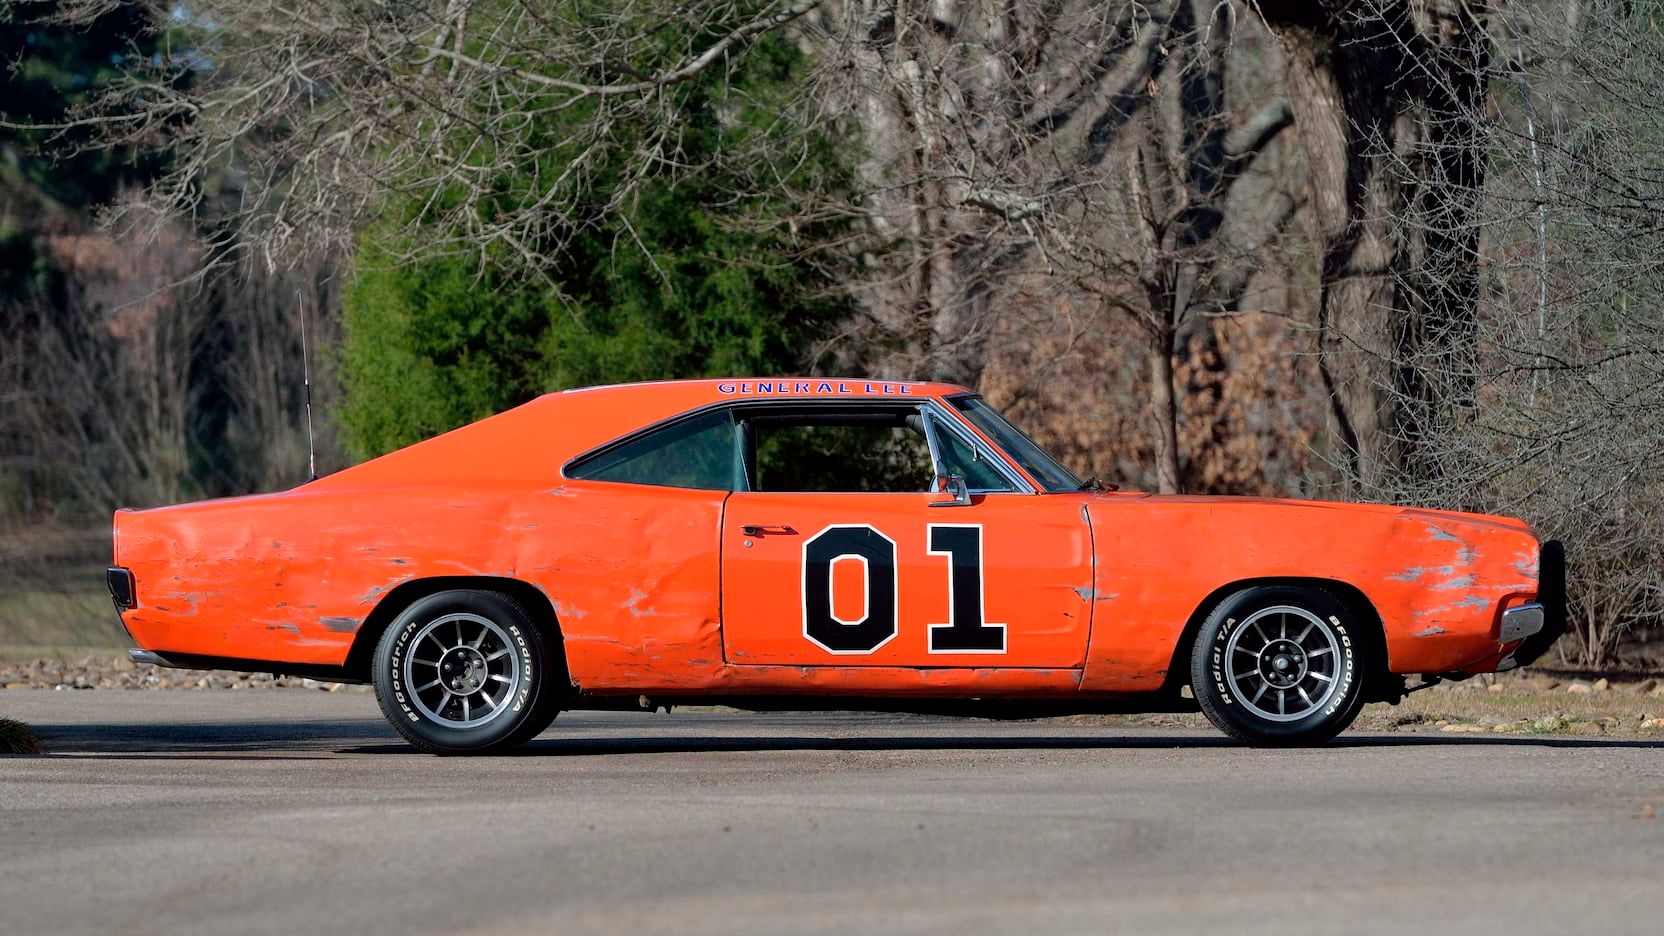 Drunk Dad Can't Fix General Lee, Sends Kid to Bed